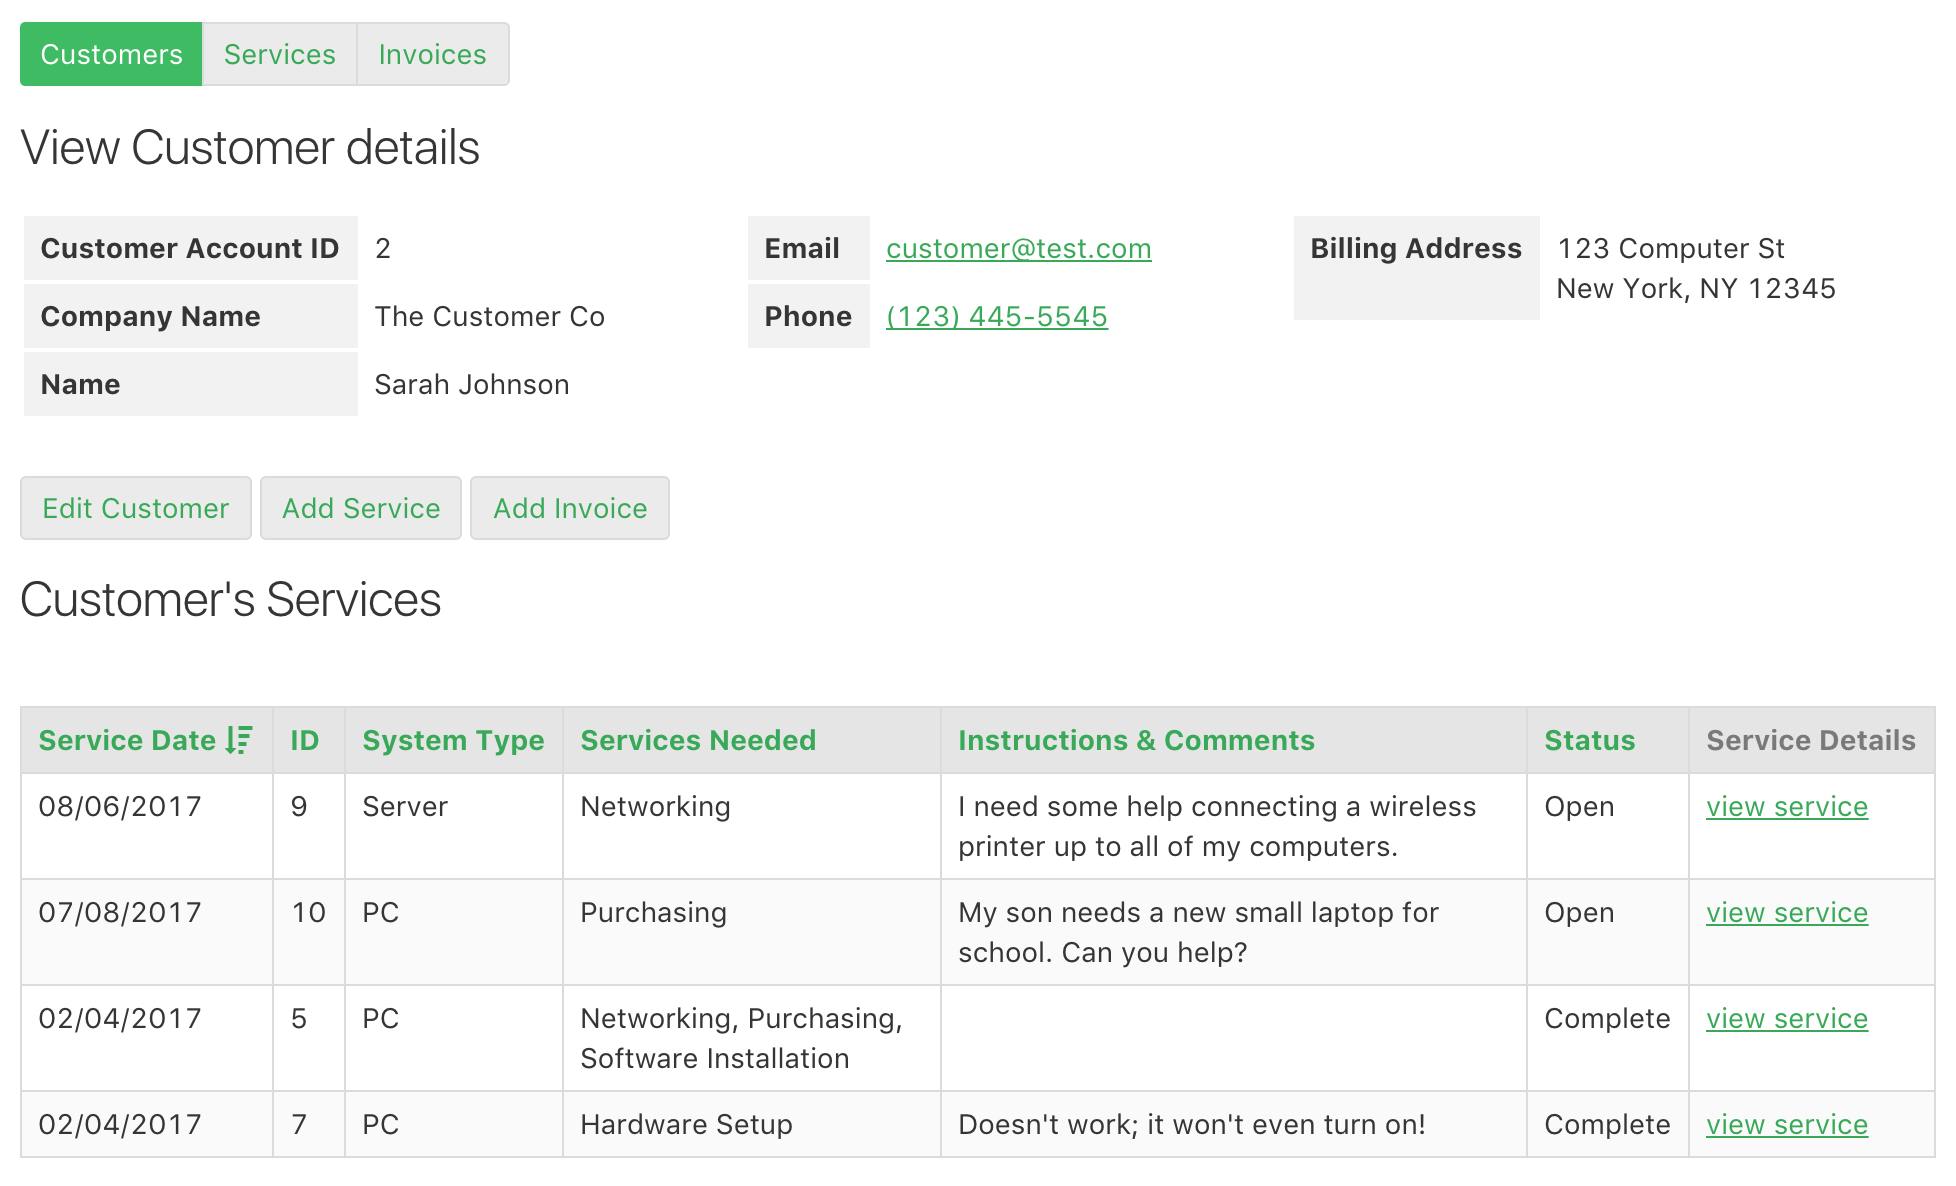 Customers log in to their own dashboard where they view their invoices and request services.